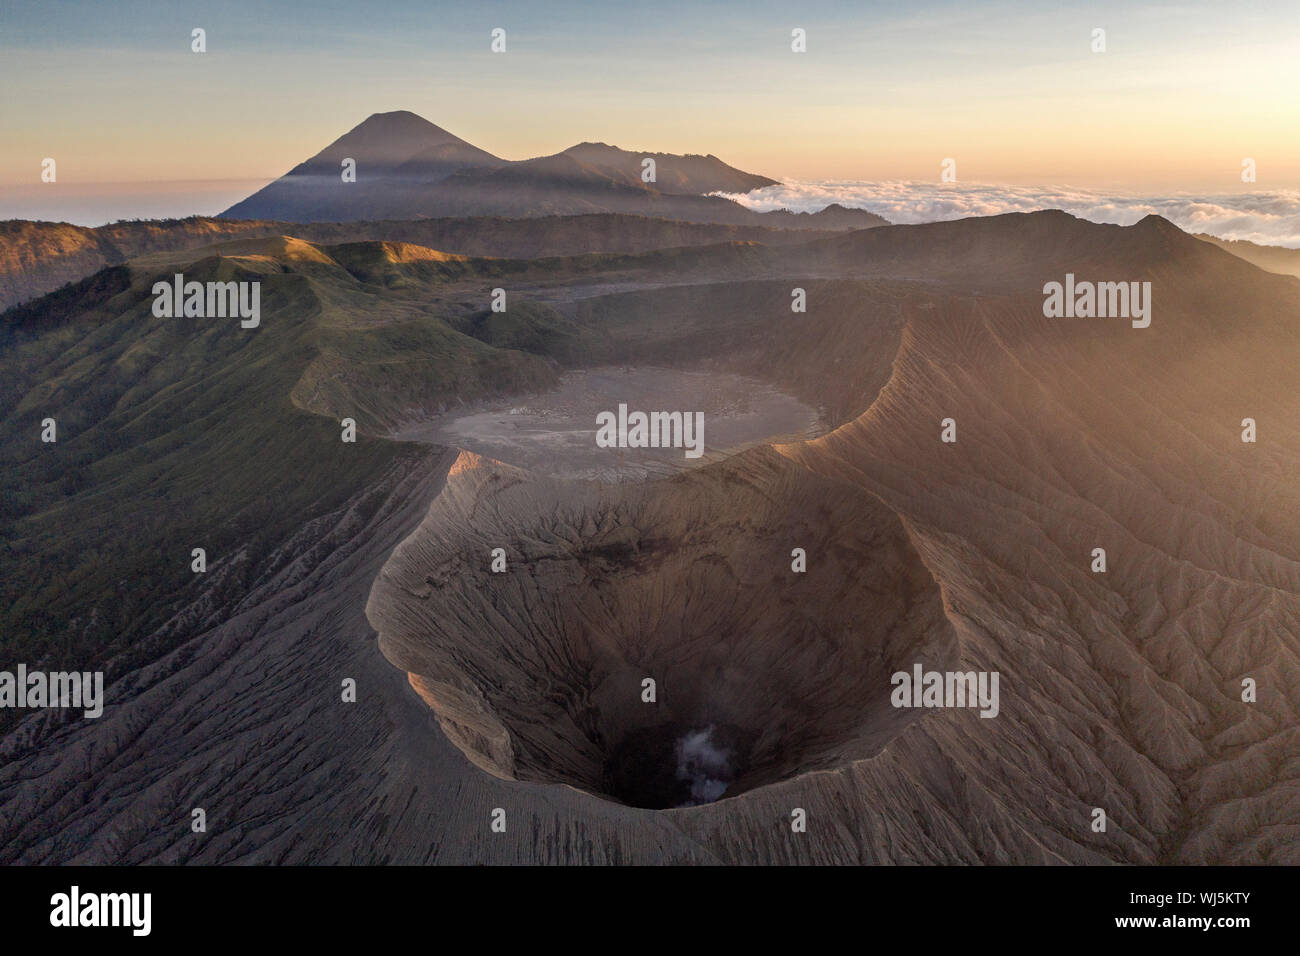 Mount Bromo volcano in the National Park in Eastern Java, Indonesia Stock Photo